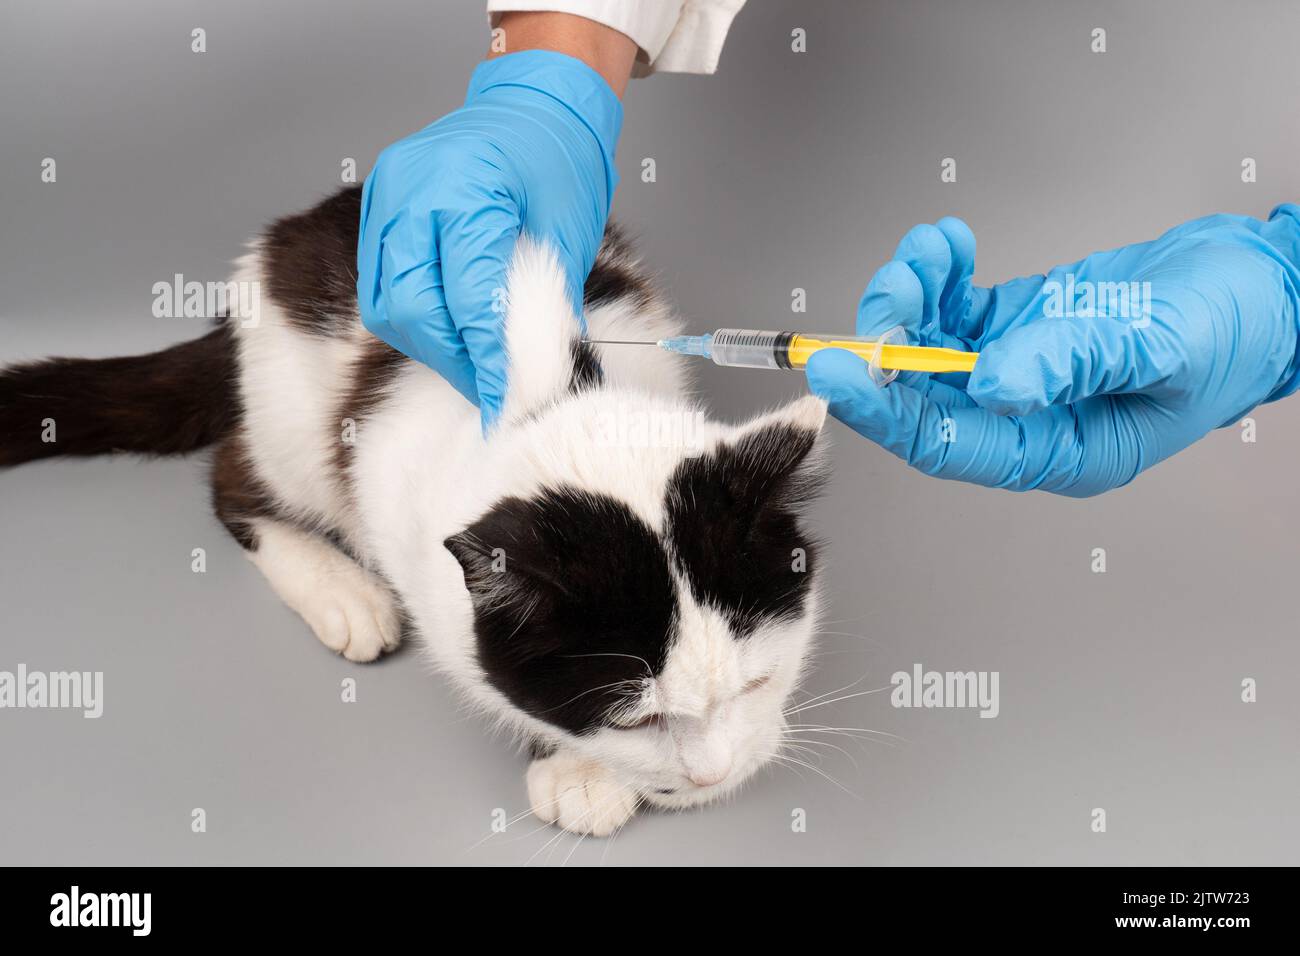 veterinarian doctor hand giving a cat an injection with a syringe. Stock Photo